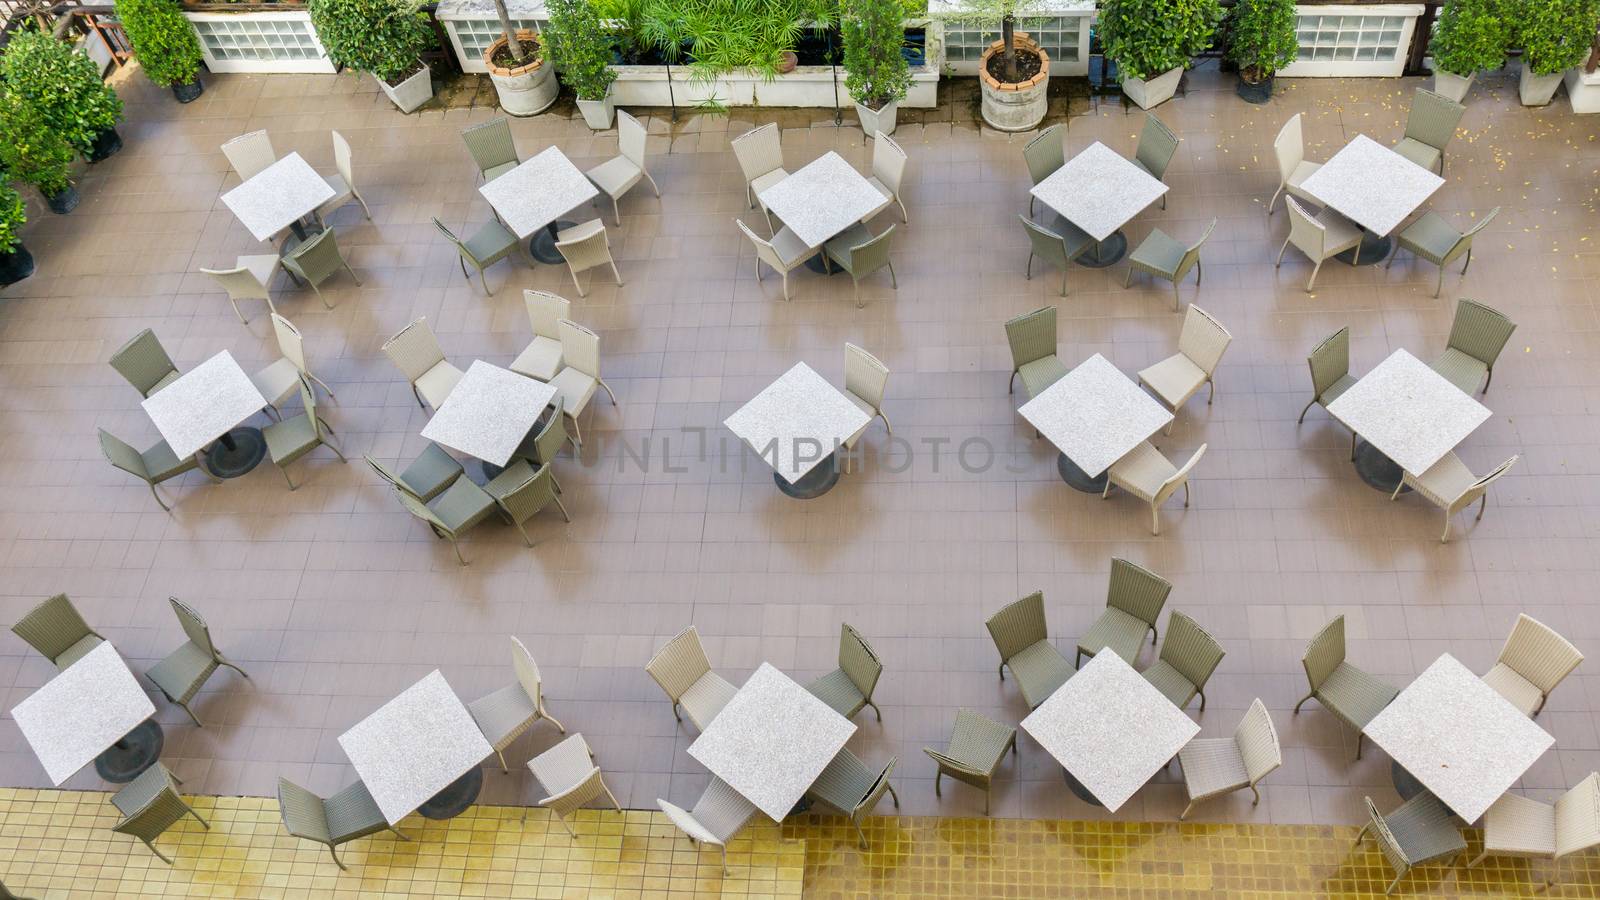 Outdoor top view of the empty chairs and table.